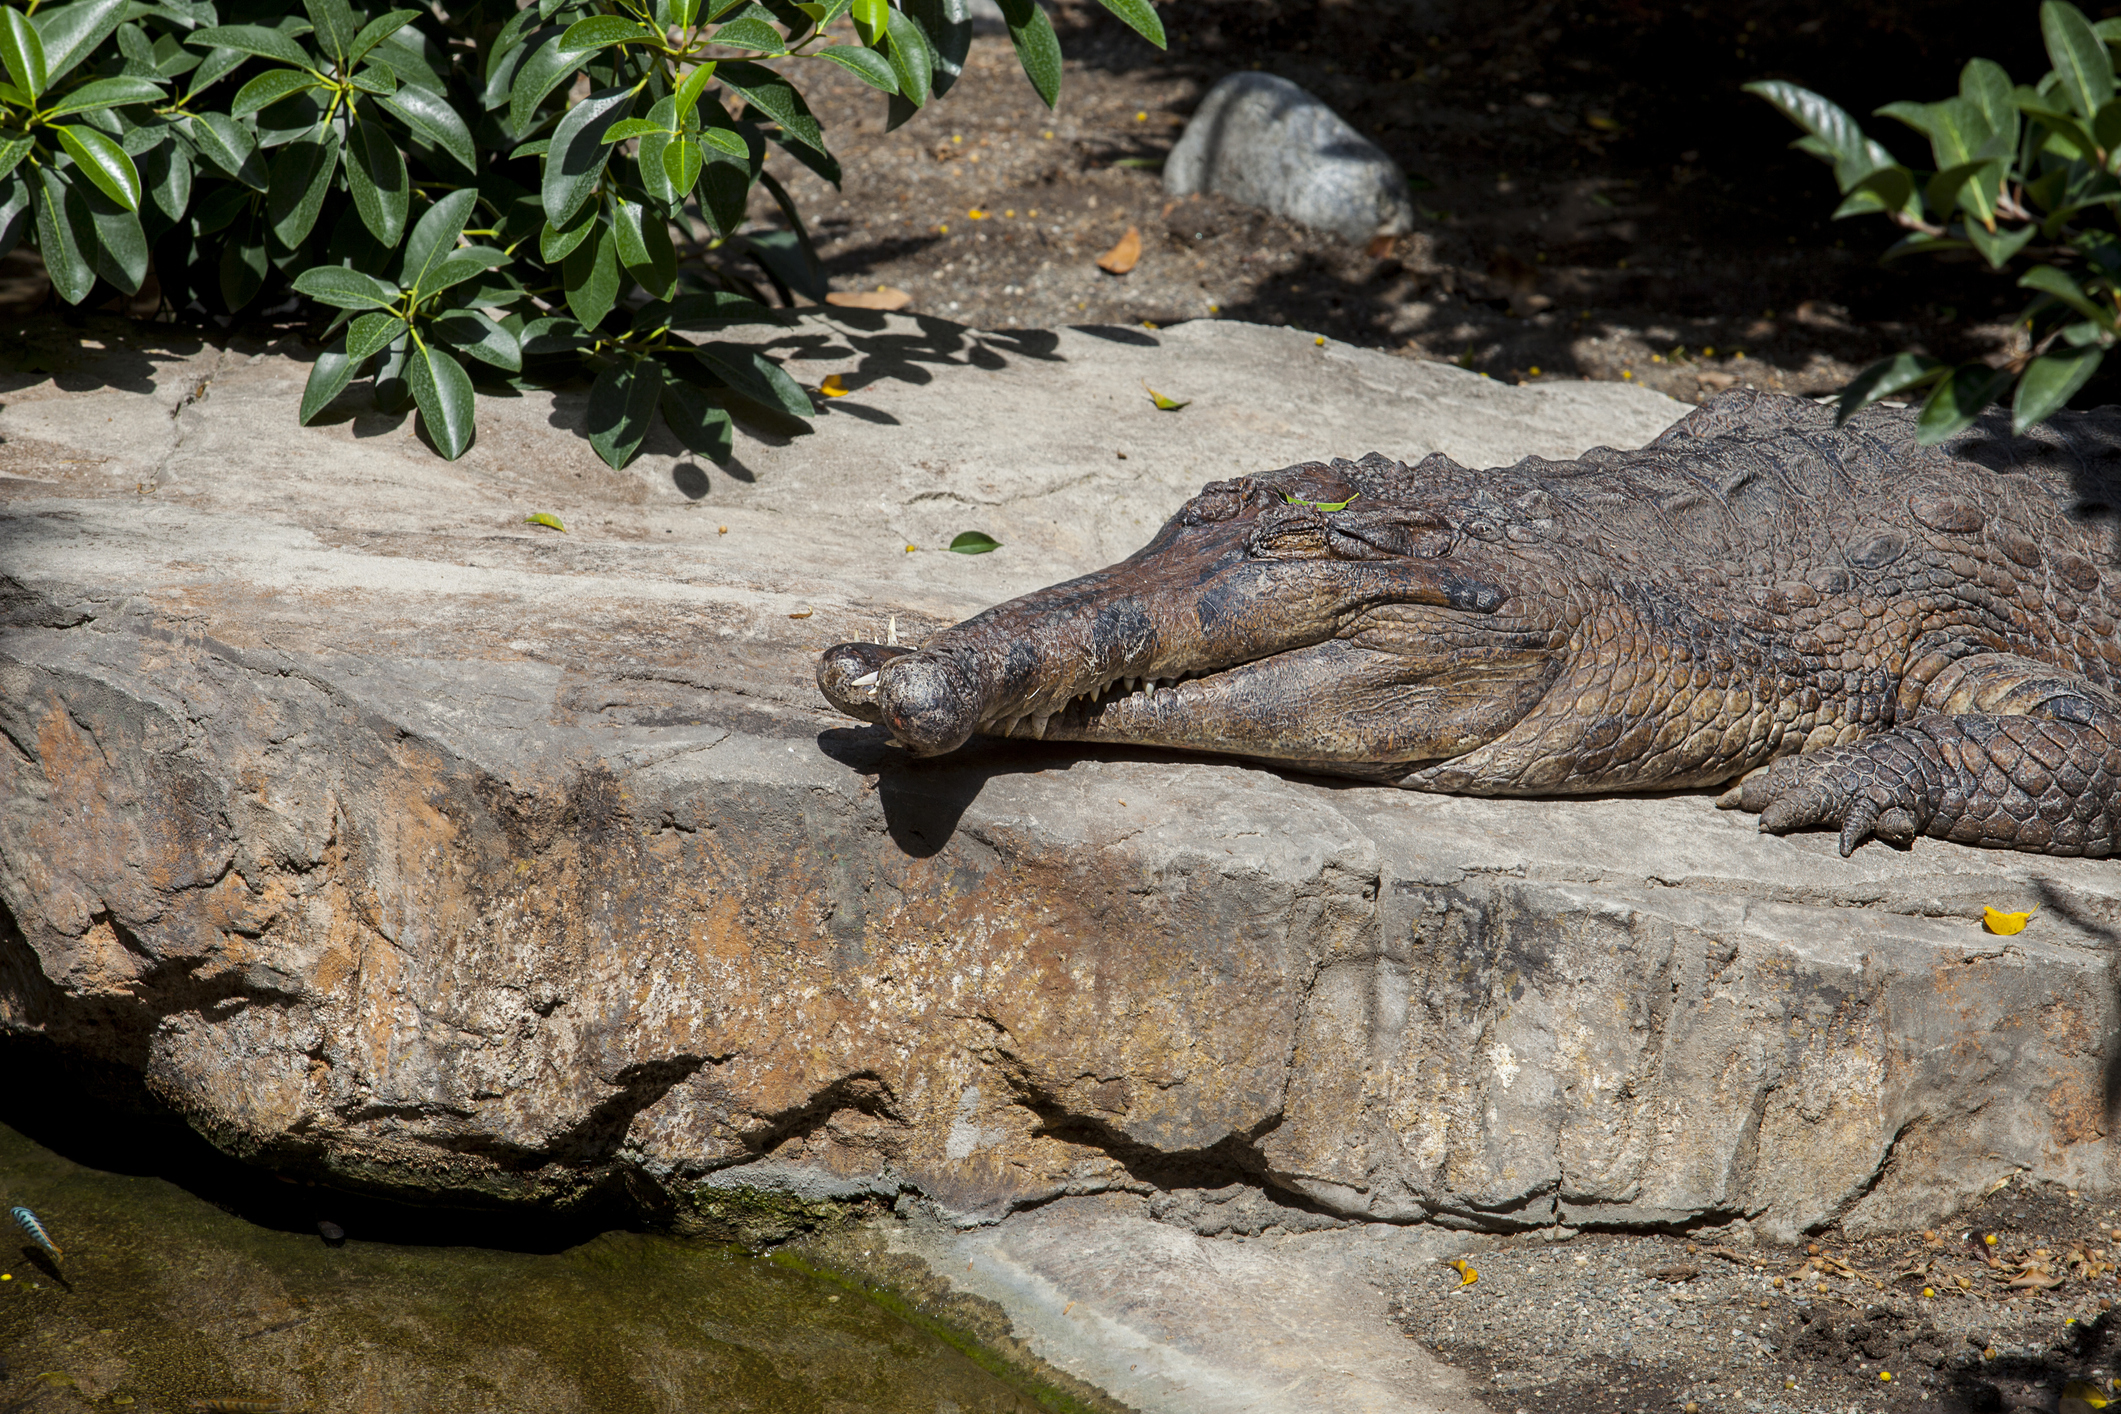 False gavial or Tomistoma schlegelii with crossed jaws, also known as the false gharial or Malayan gharial